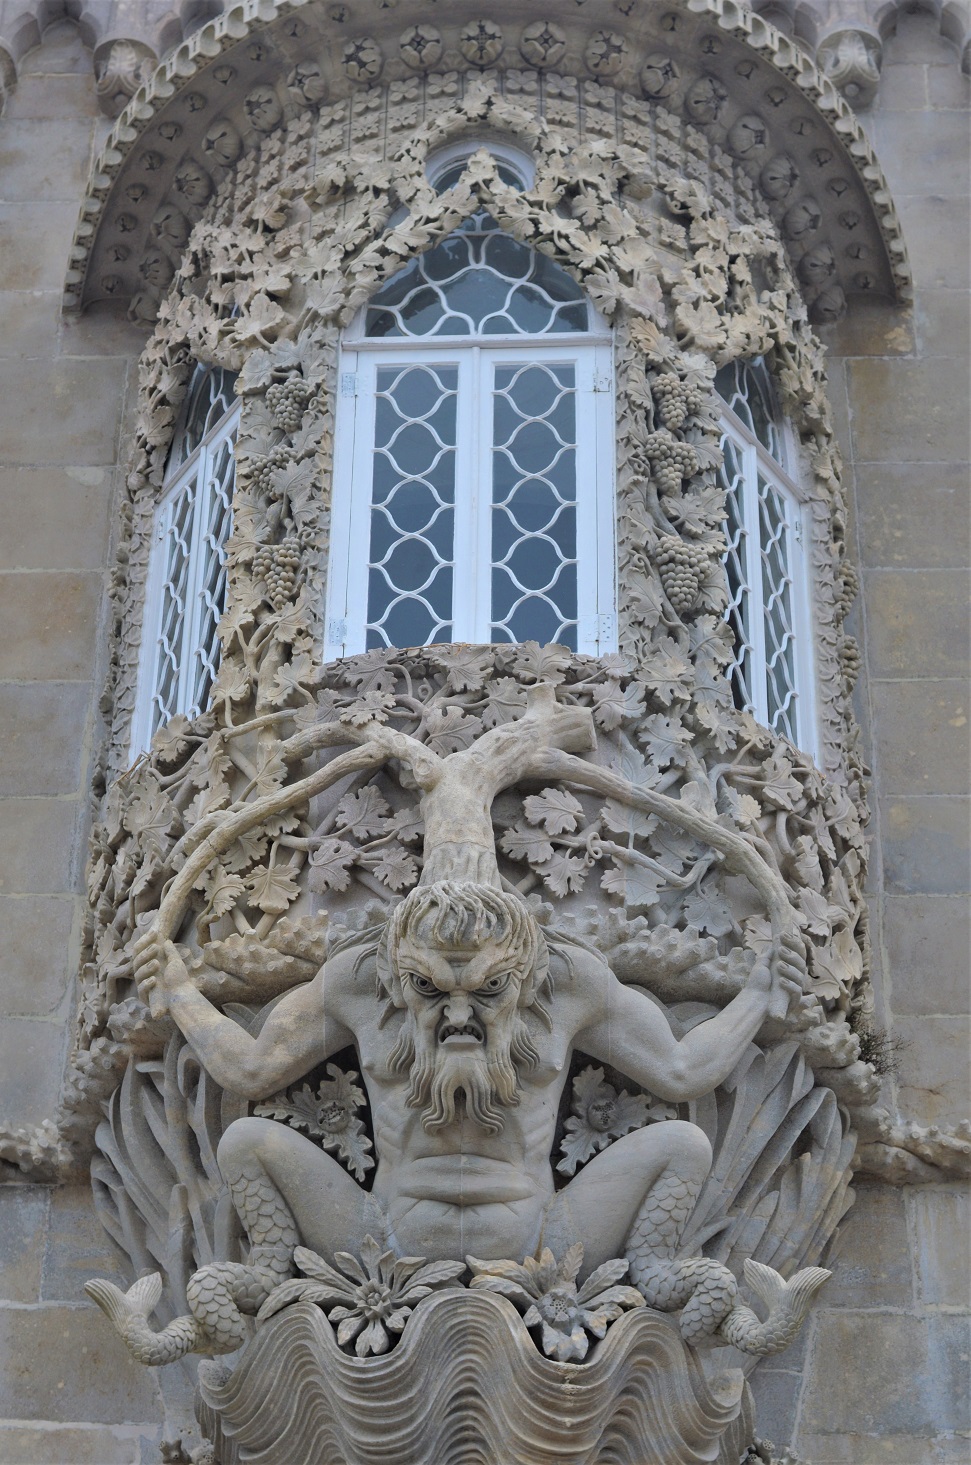 Detailed window in the Pena Palace in Sintra, Portugal